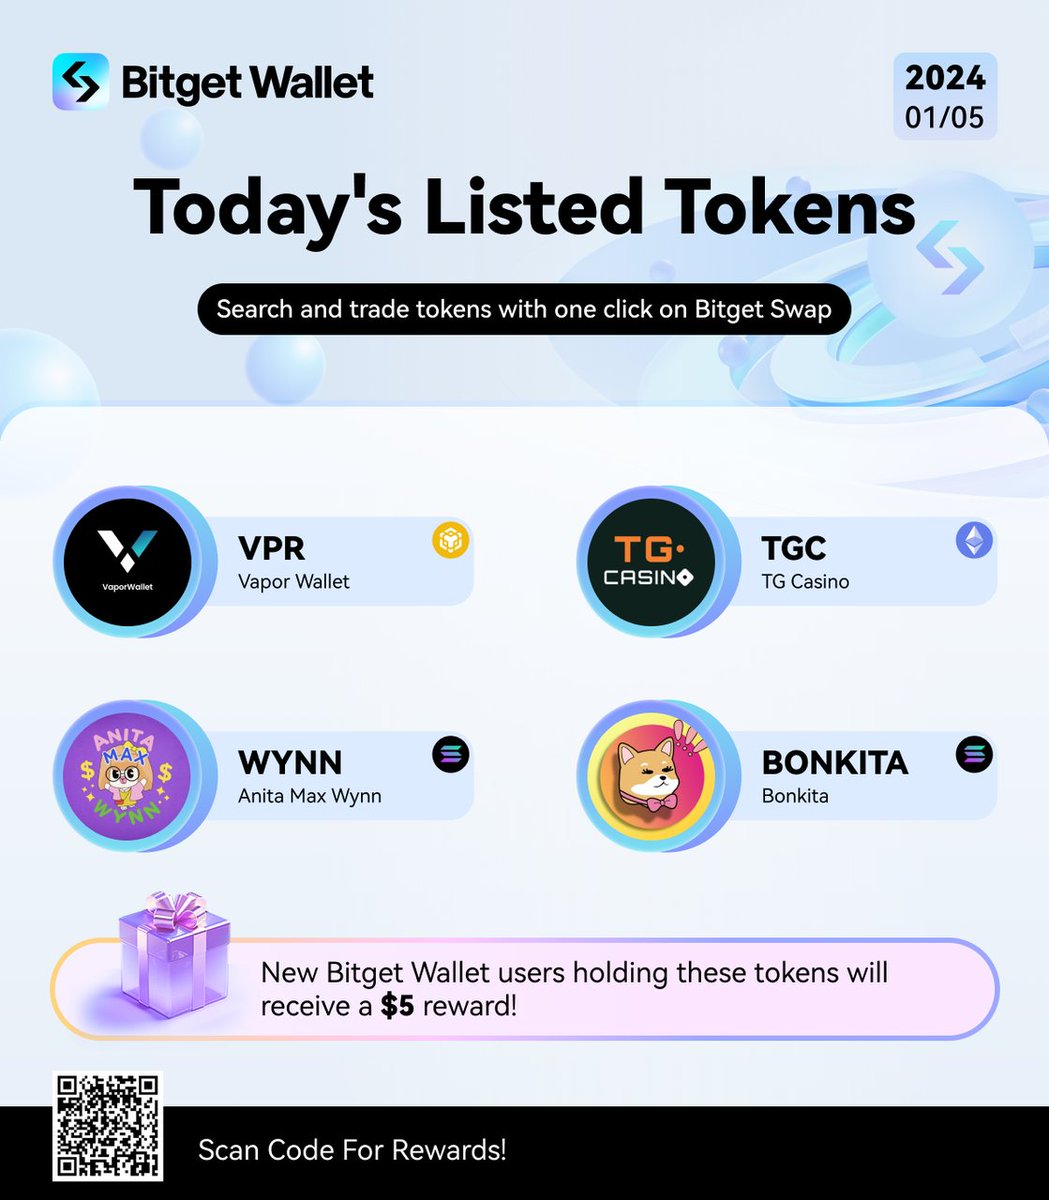 You want it, we list it! $VPR, $TGC, $WYNN, $BONKITA now on Bitget Swap! Exclusive promo: New Bitget Wallet users holding these tokens can sign up on this form to receive a $5 reward! Click here (or scan the QR code below): forms.gle/9roGvCoV6wT87C… @vaporwallet @TGCasino_